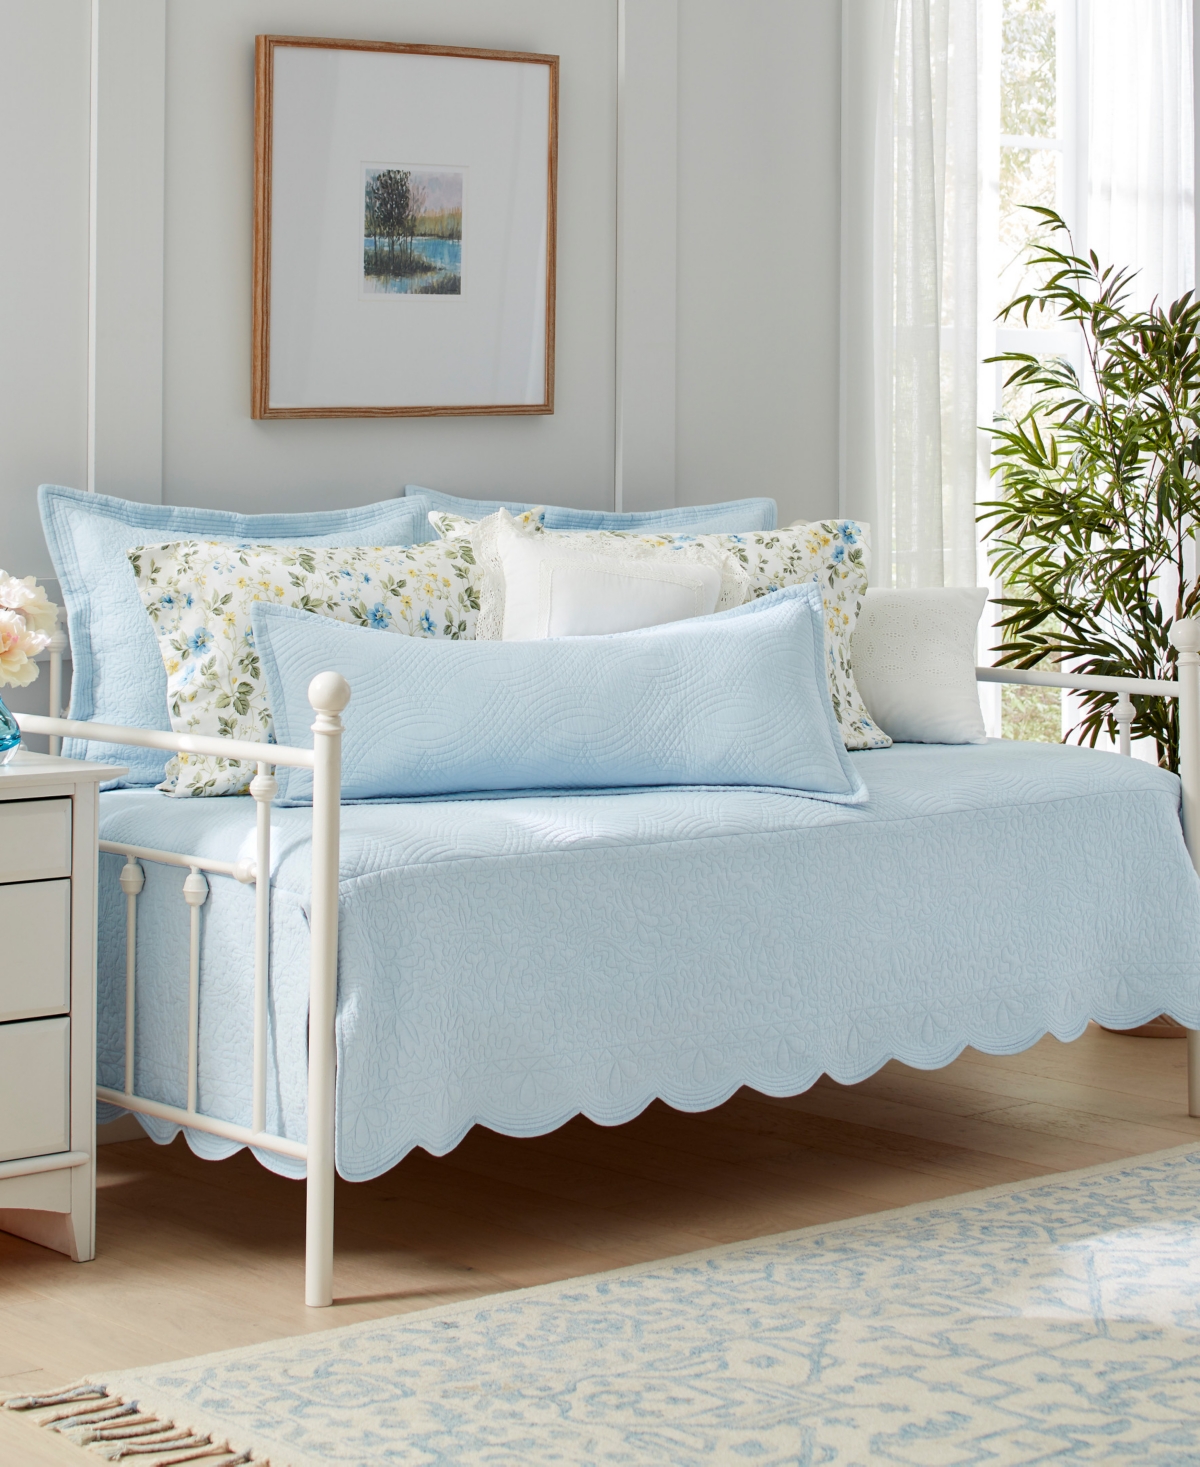 Laura Ashley Solid Trellis 4 Piece Quilt Set, Daybed In Blue Cashmere